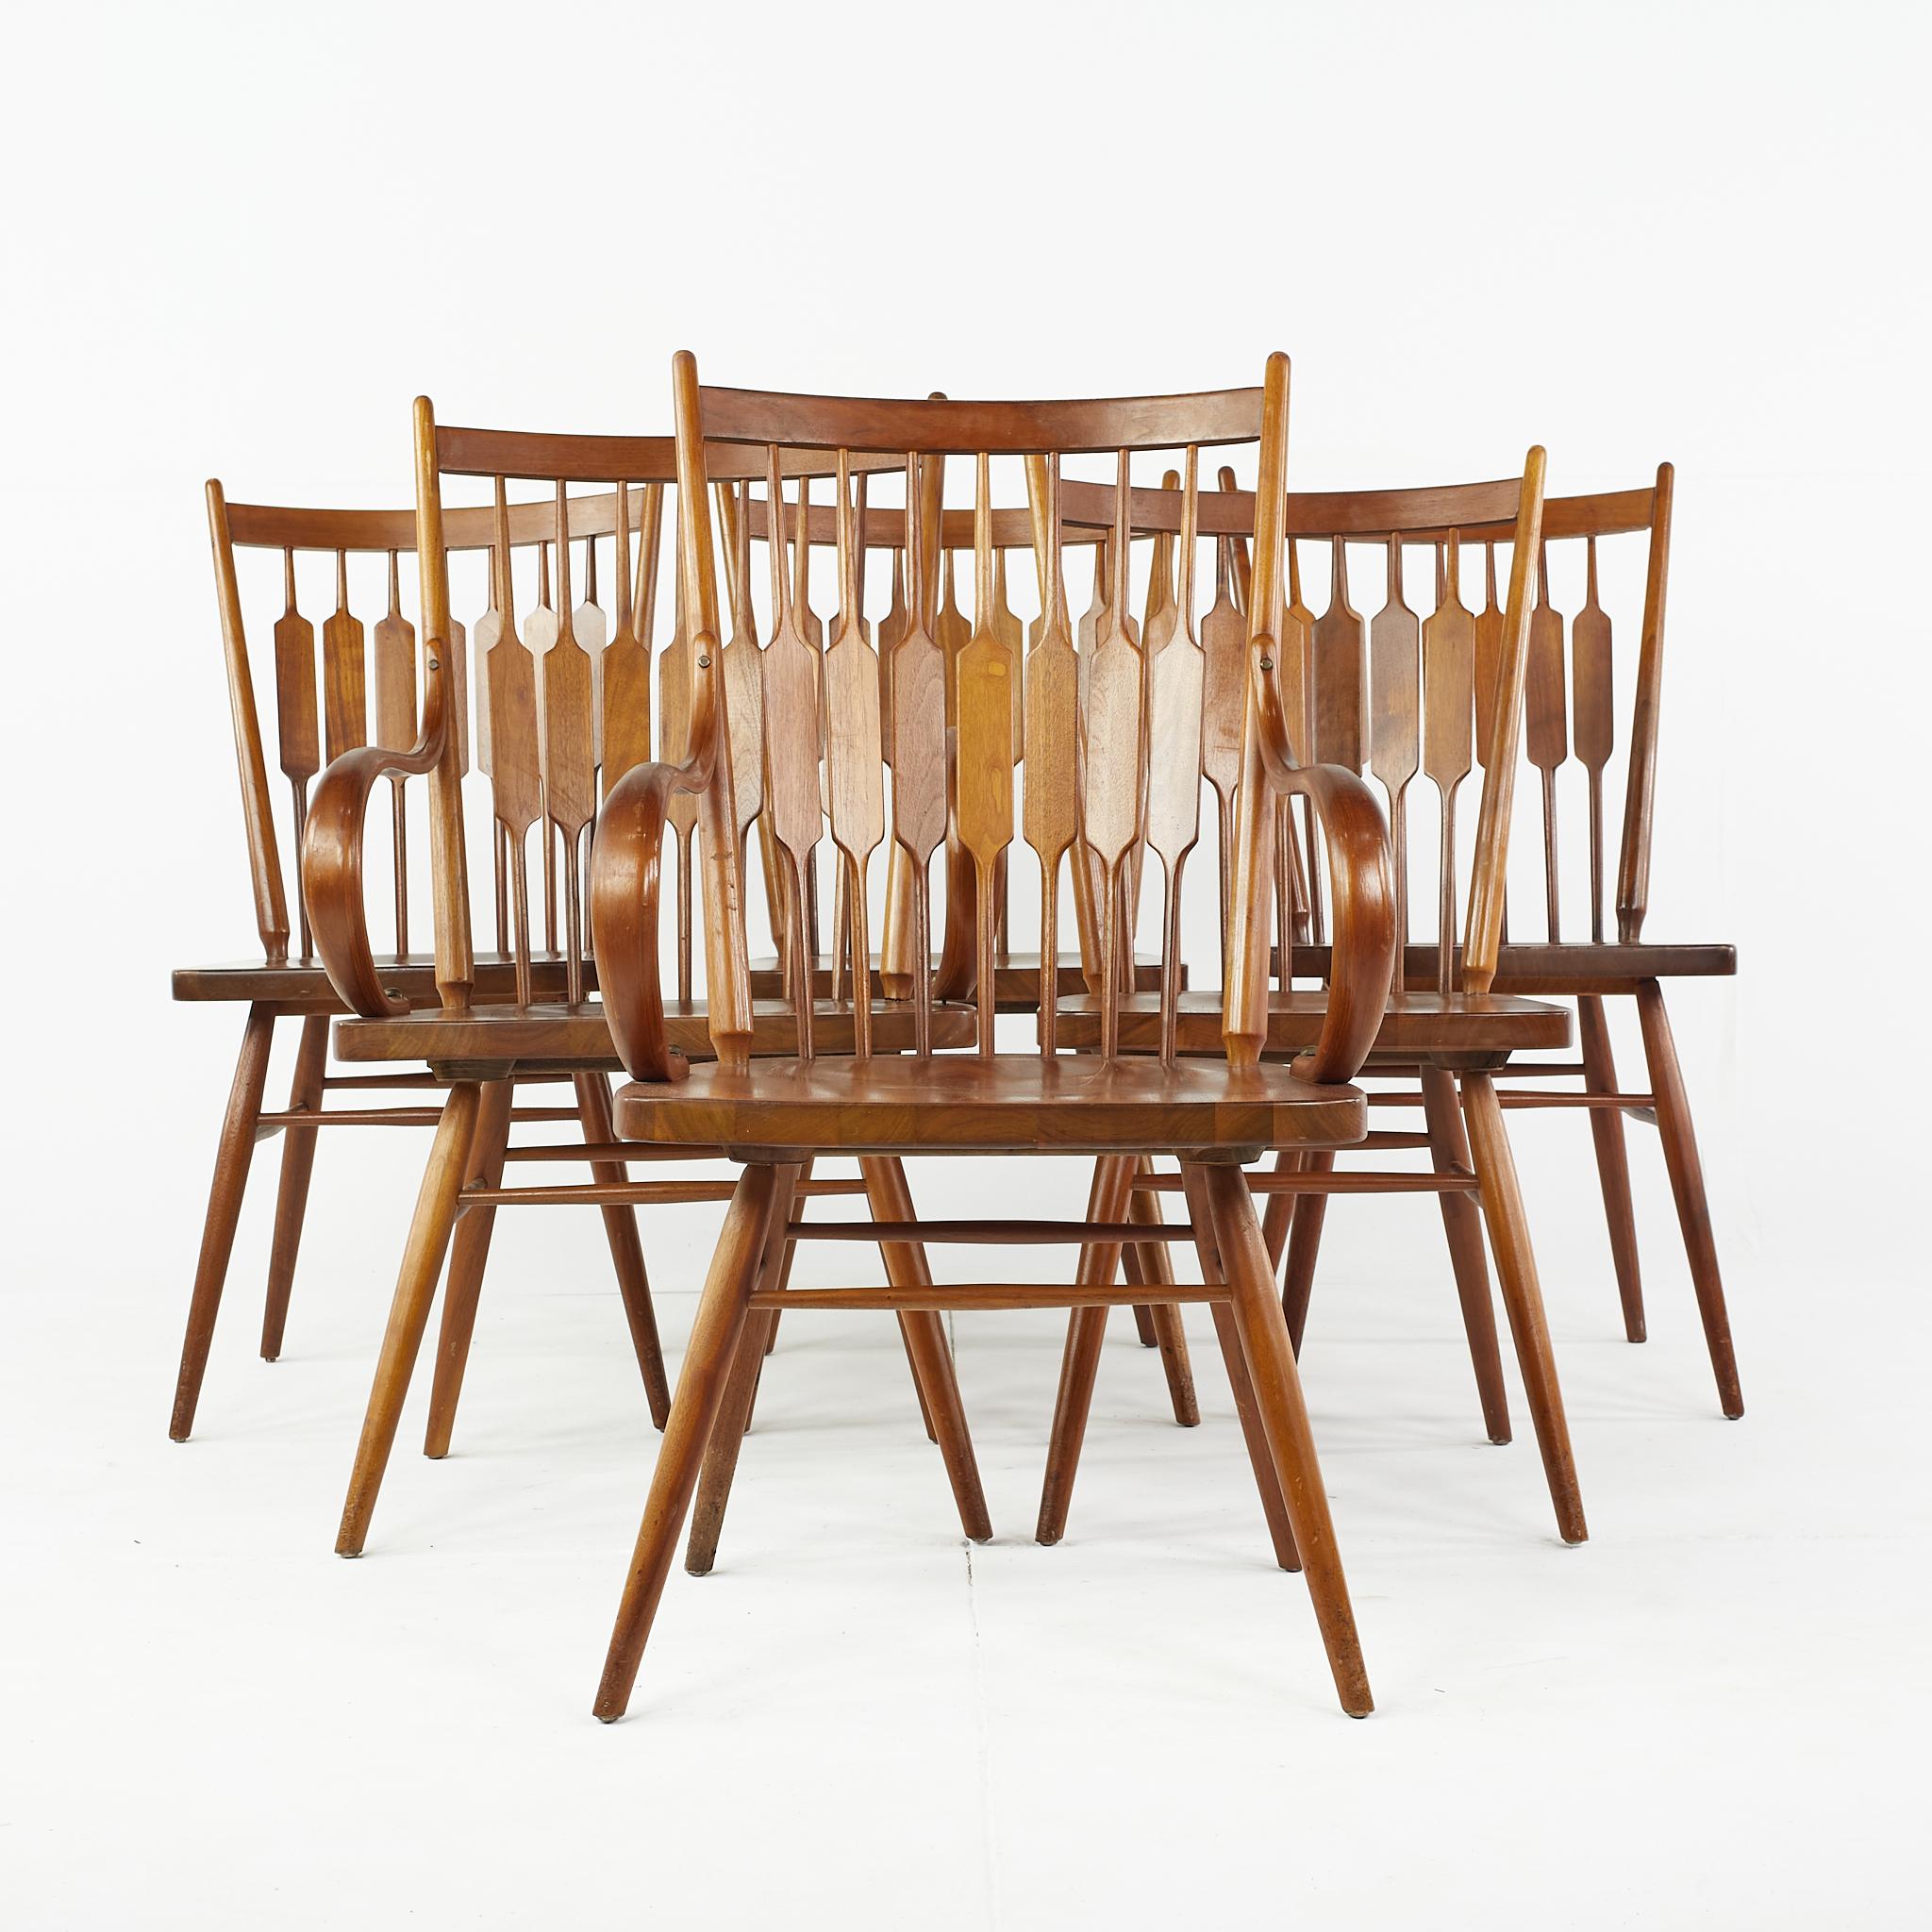 Kipp Stewart for Drexel Centennial mid century walnut dining chairs - set of 6

Each side chair measures: 18 wide x 20.25 deep x 37 high, with a seat height of 18 inches; captains chair measures 23.5 wide x 22.25 deep x 38.75 high, the arm height